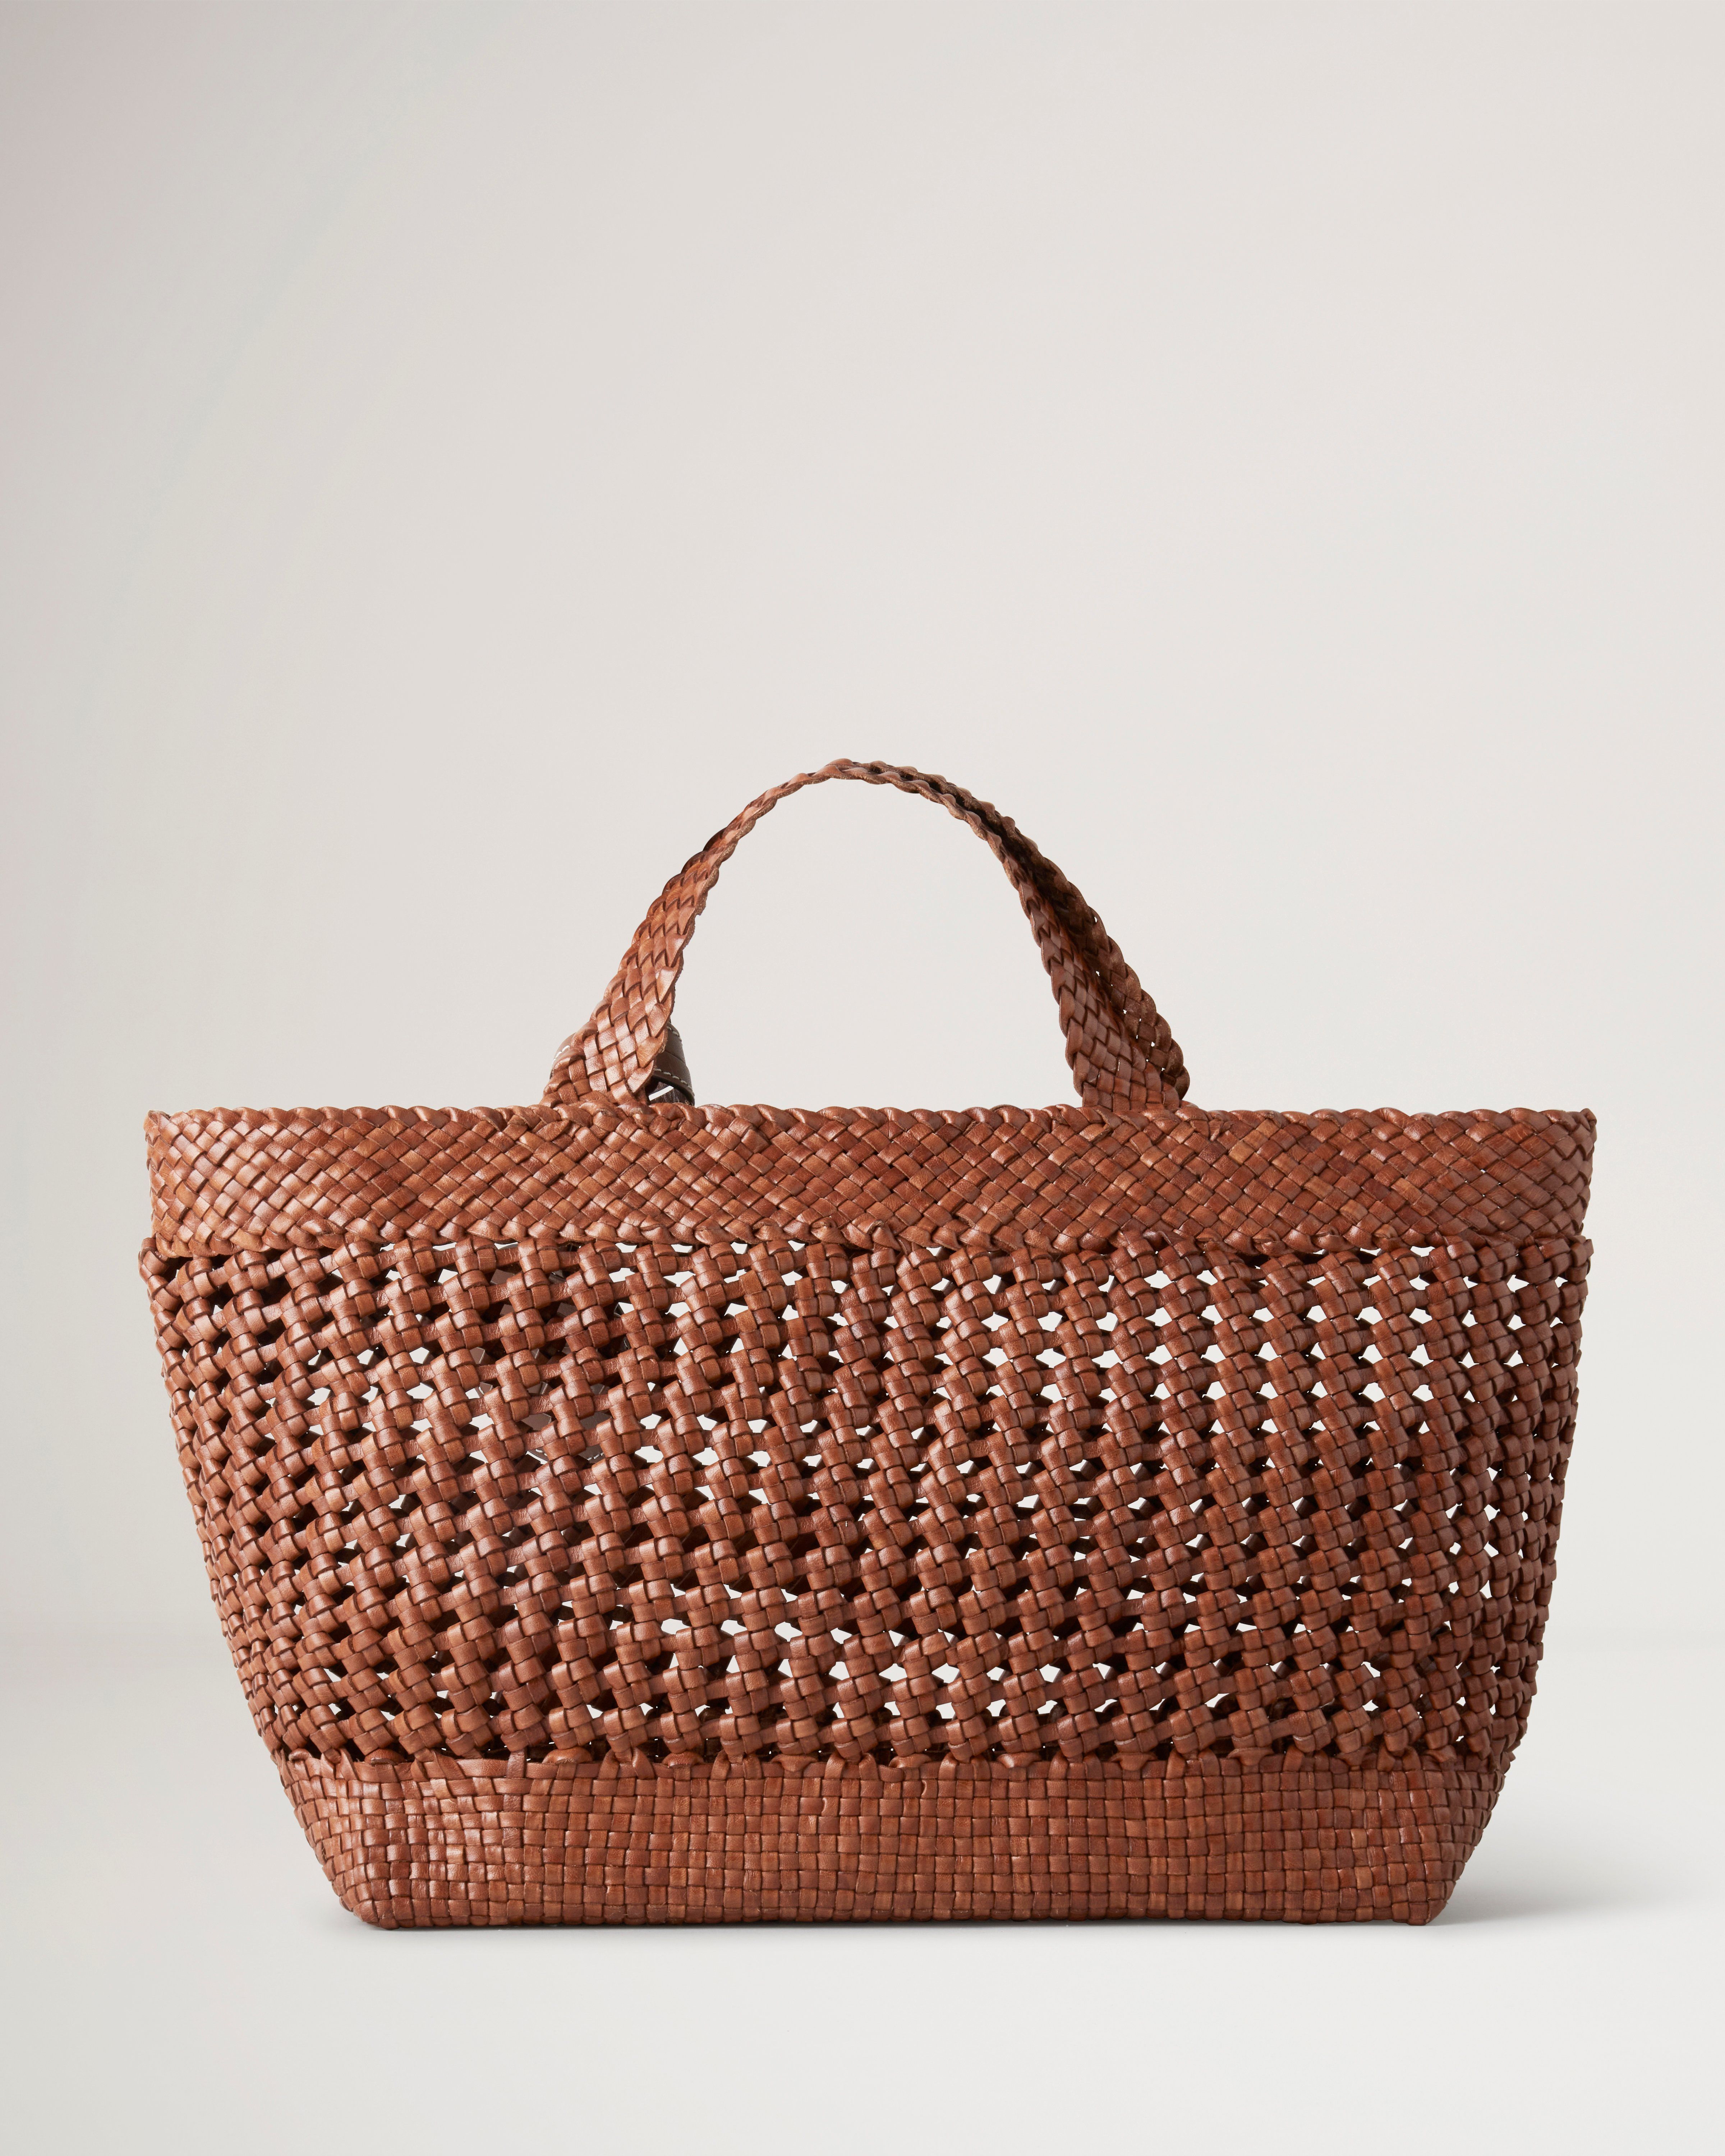 Woven leather bag LUCIA